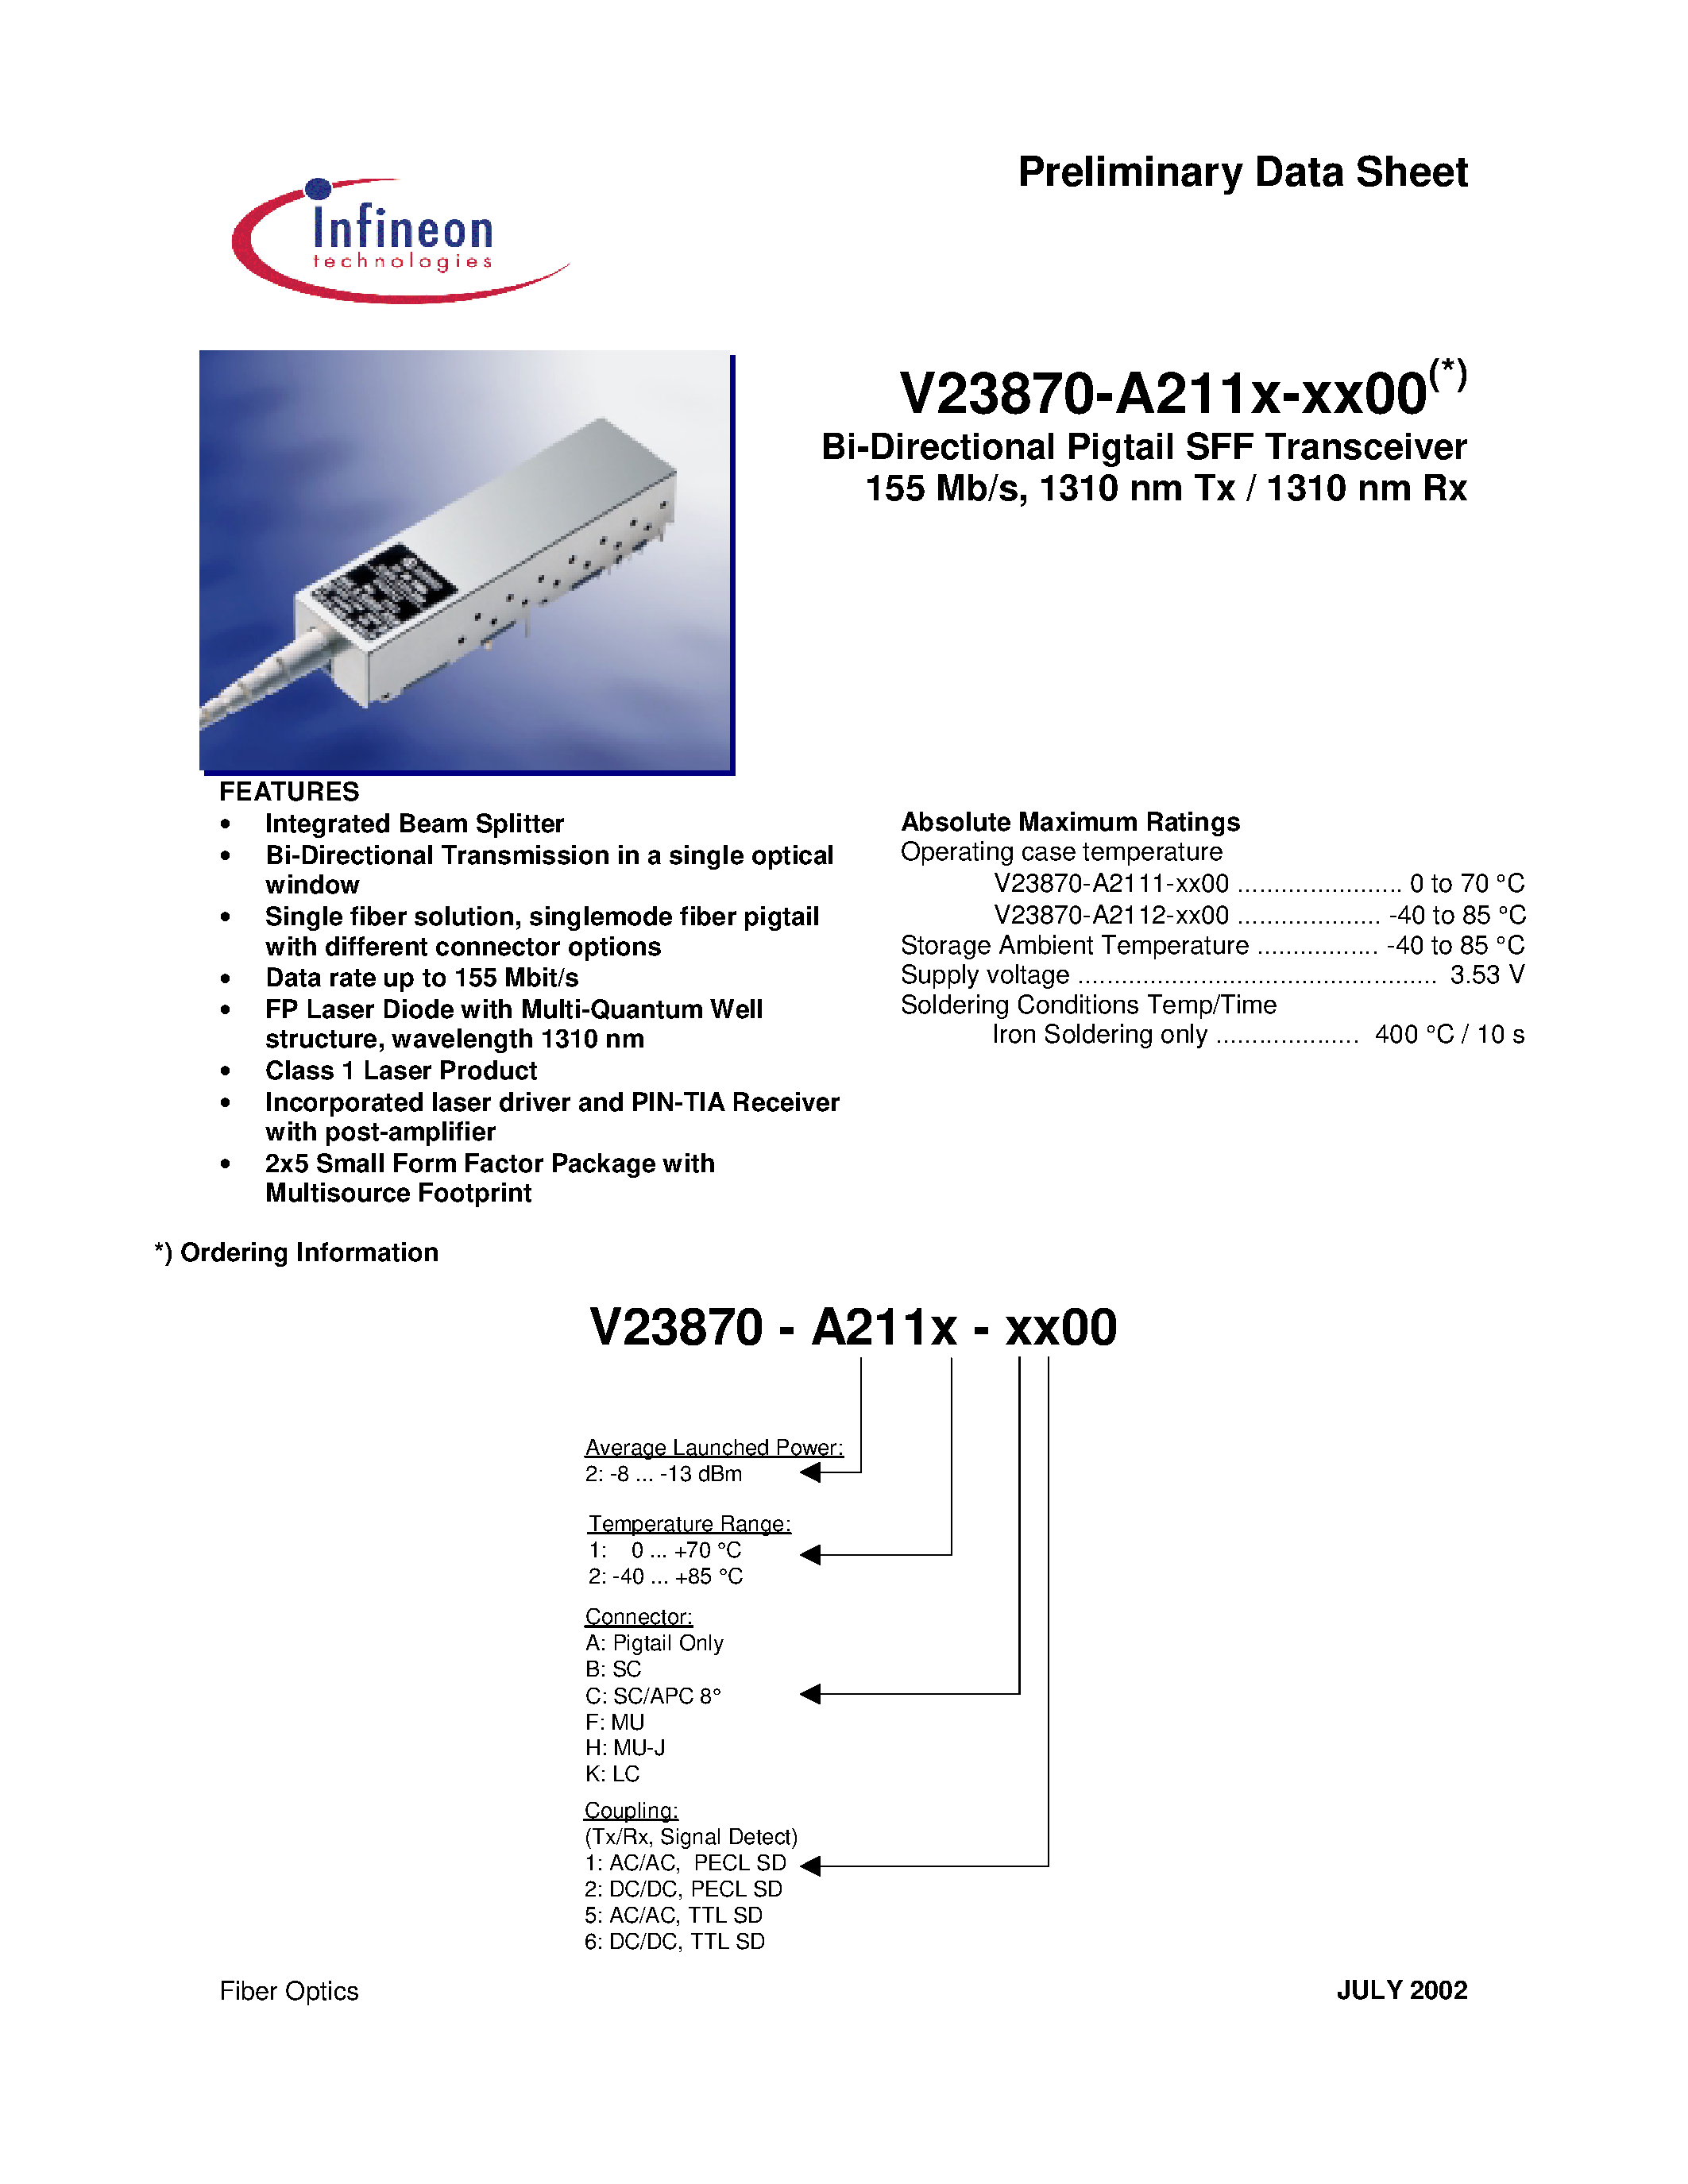 Datasheet V23870-A2111-C500 - Bi-Directional Pigtail SFF Transceiver 155 Mb/s/ 1310 nm Tx / 1310 nm Rx page 1